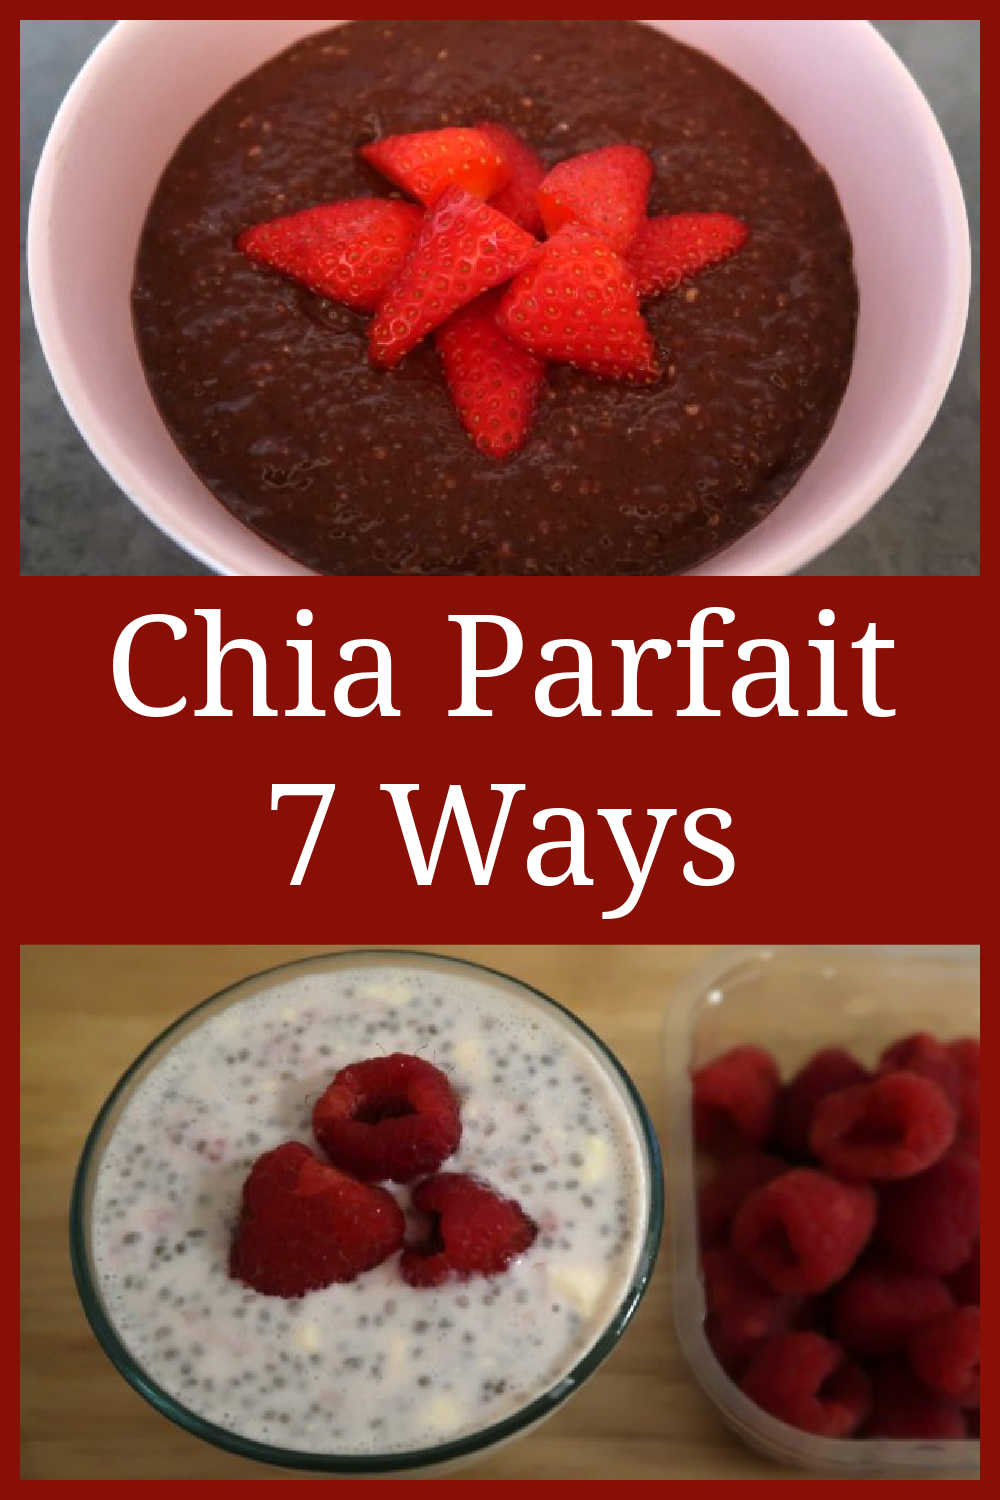 Chia Parfait - 7 Ways - how to make easy chia seed pudding parfaits including healthy berry, chocolate and coconut recipes.